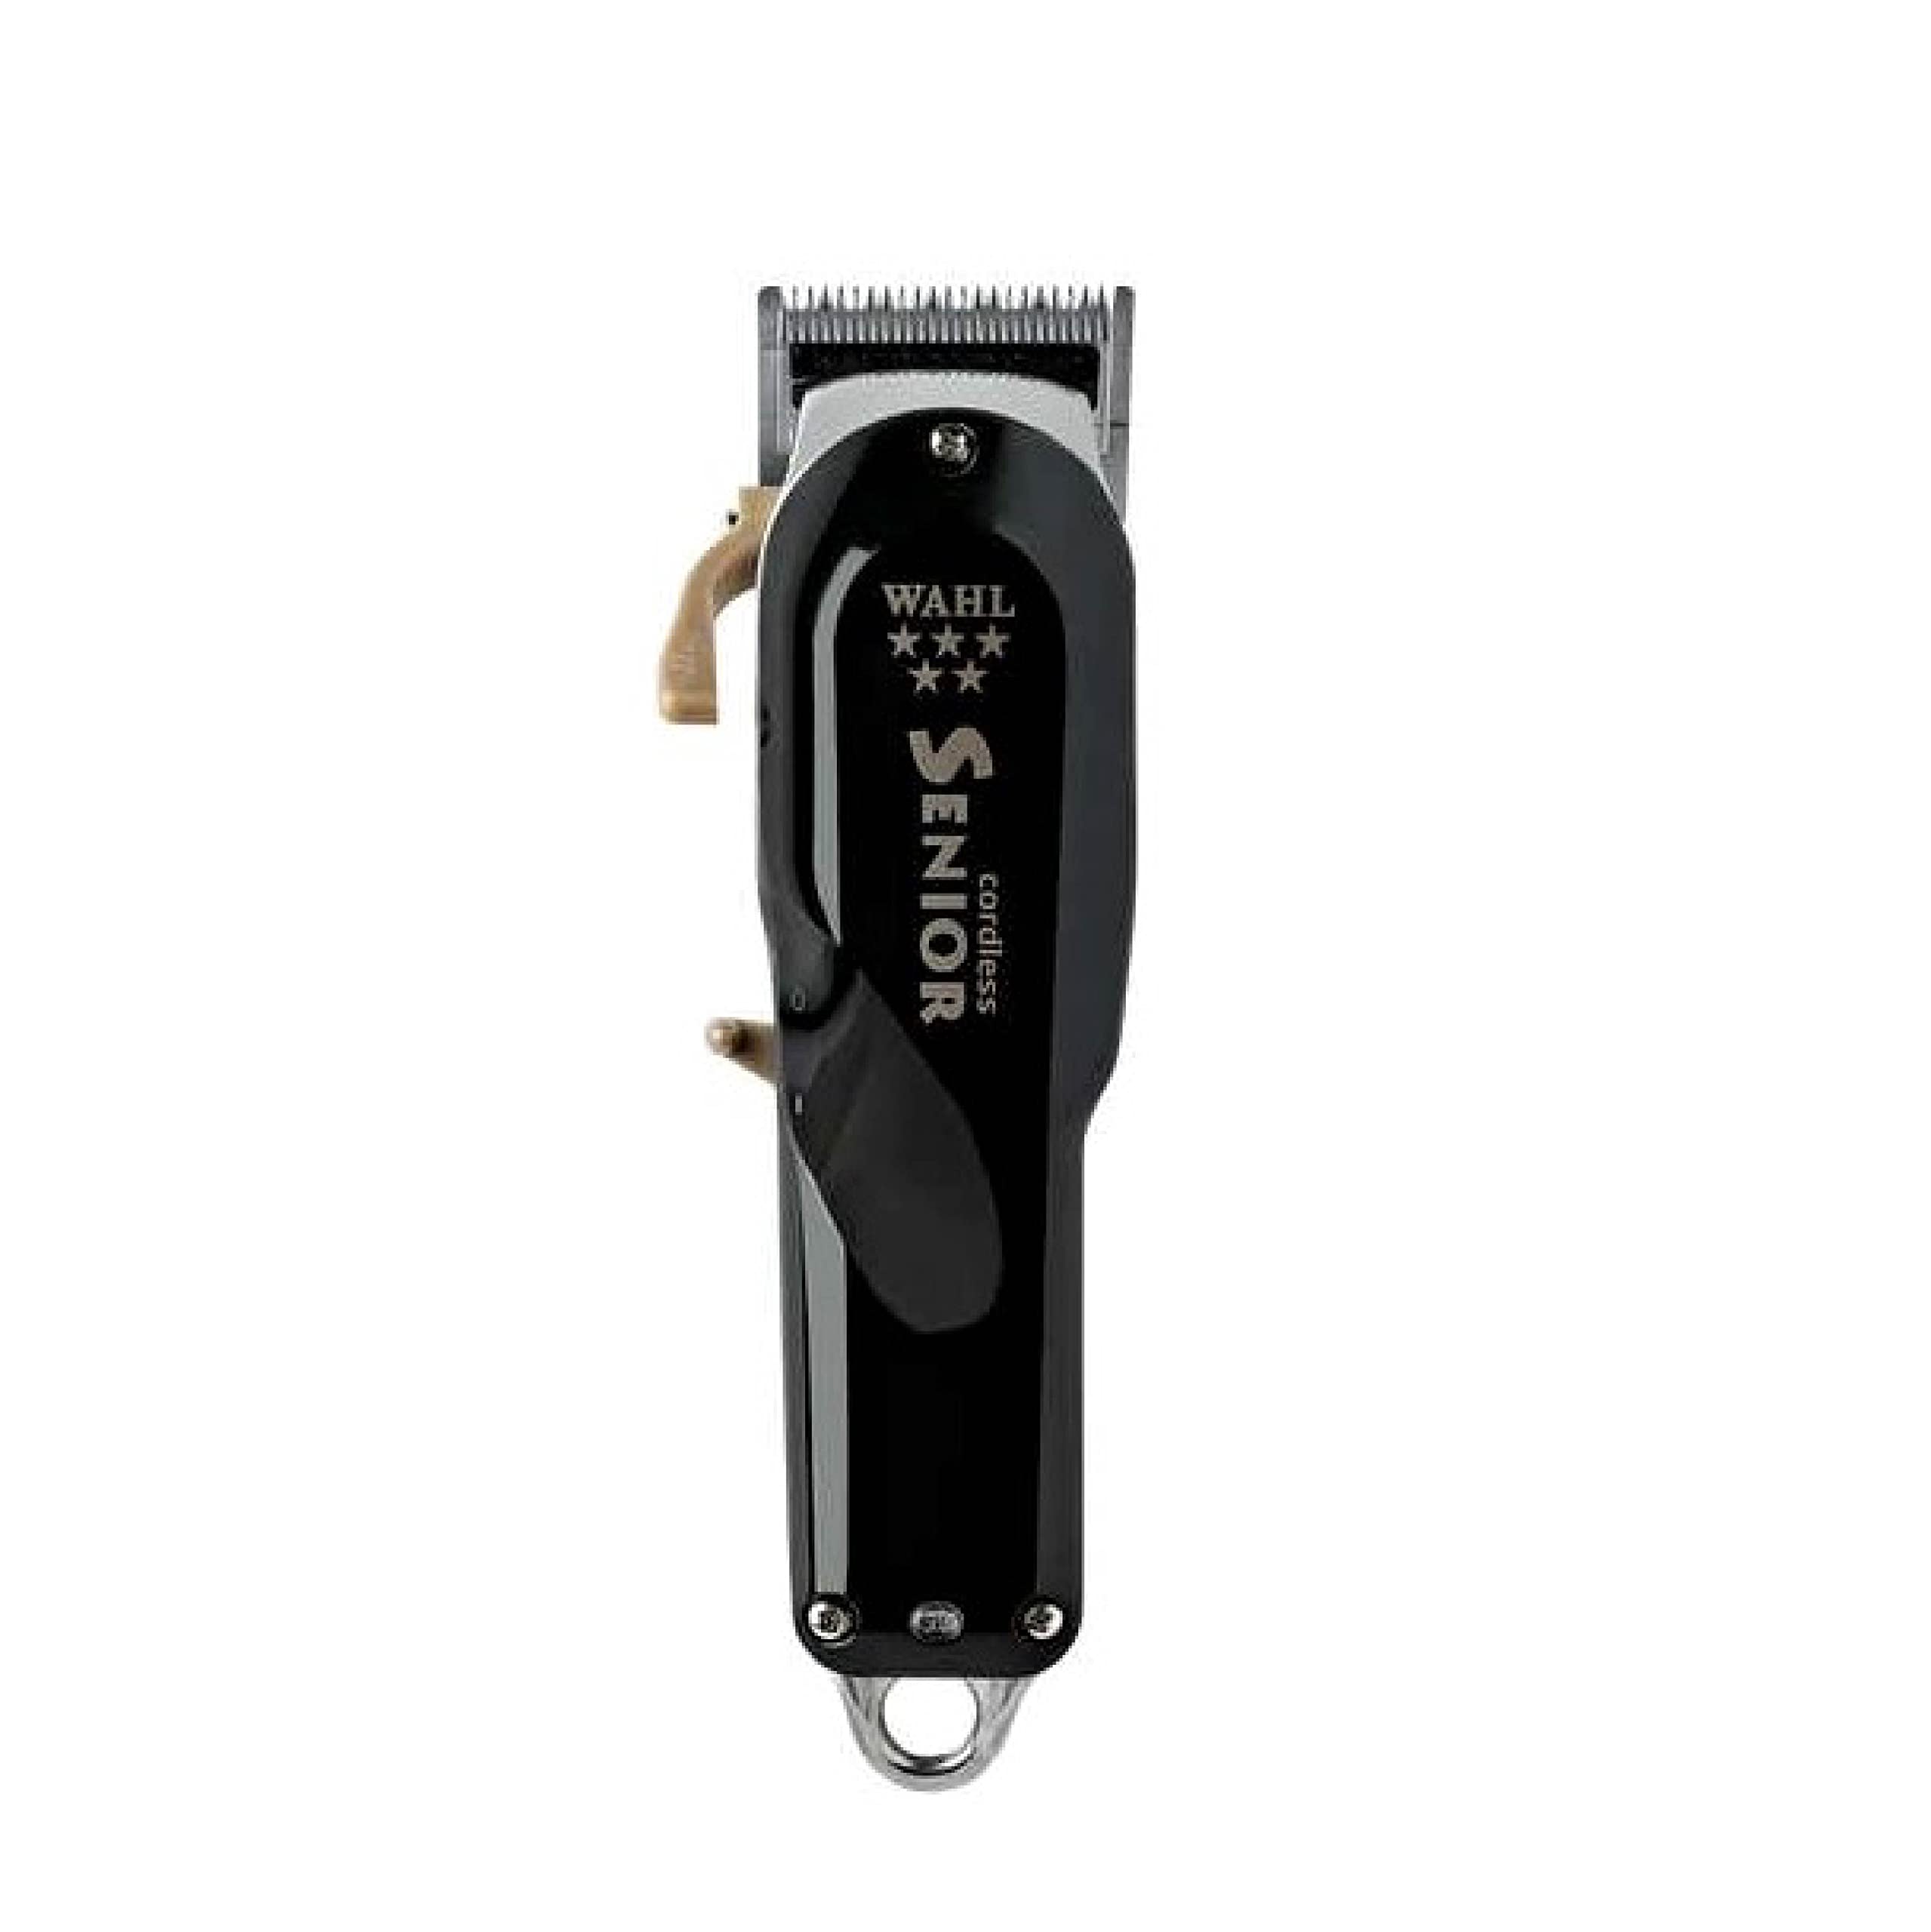 Wahl Professional 5 Star Series Cordless Senior Clipper, 5 Star Series Barber Cape, Black and Silver Barber Towel, & Premium Black Cutting Guides #3171-500 - 1/8